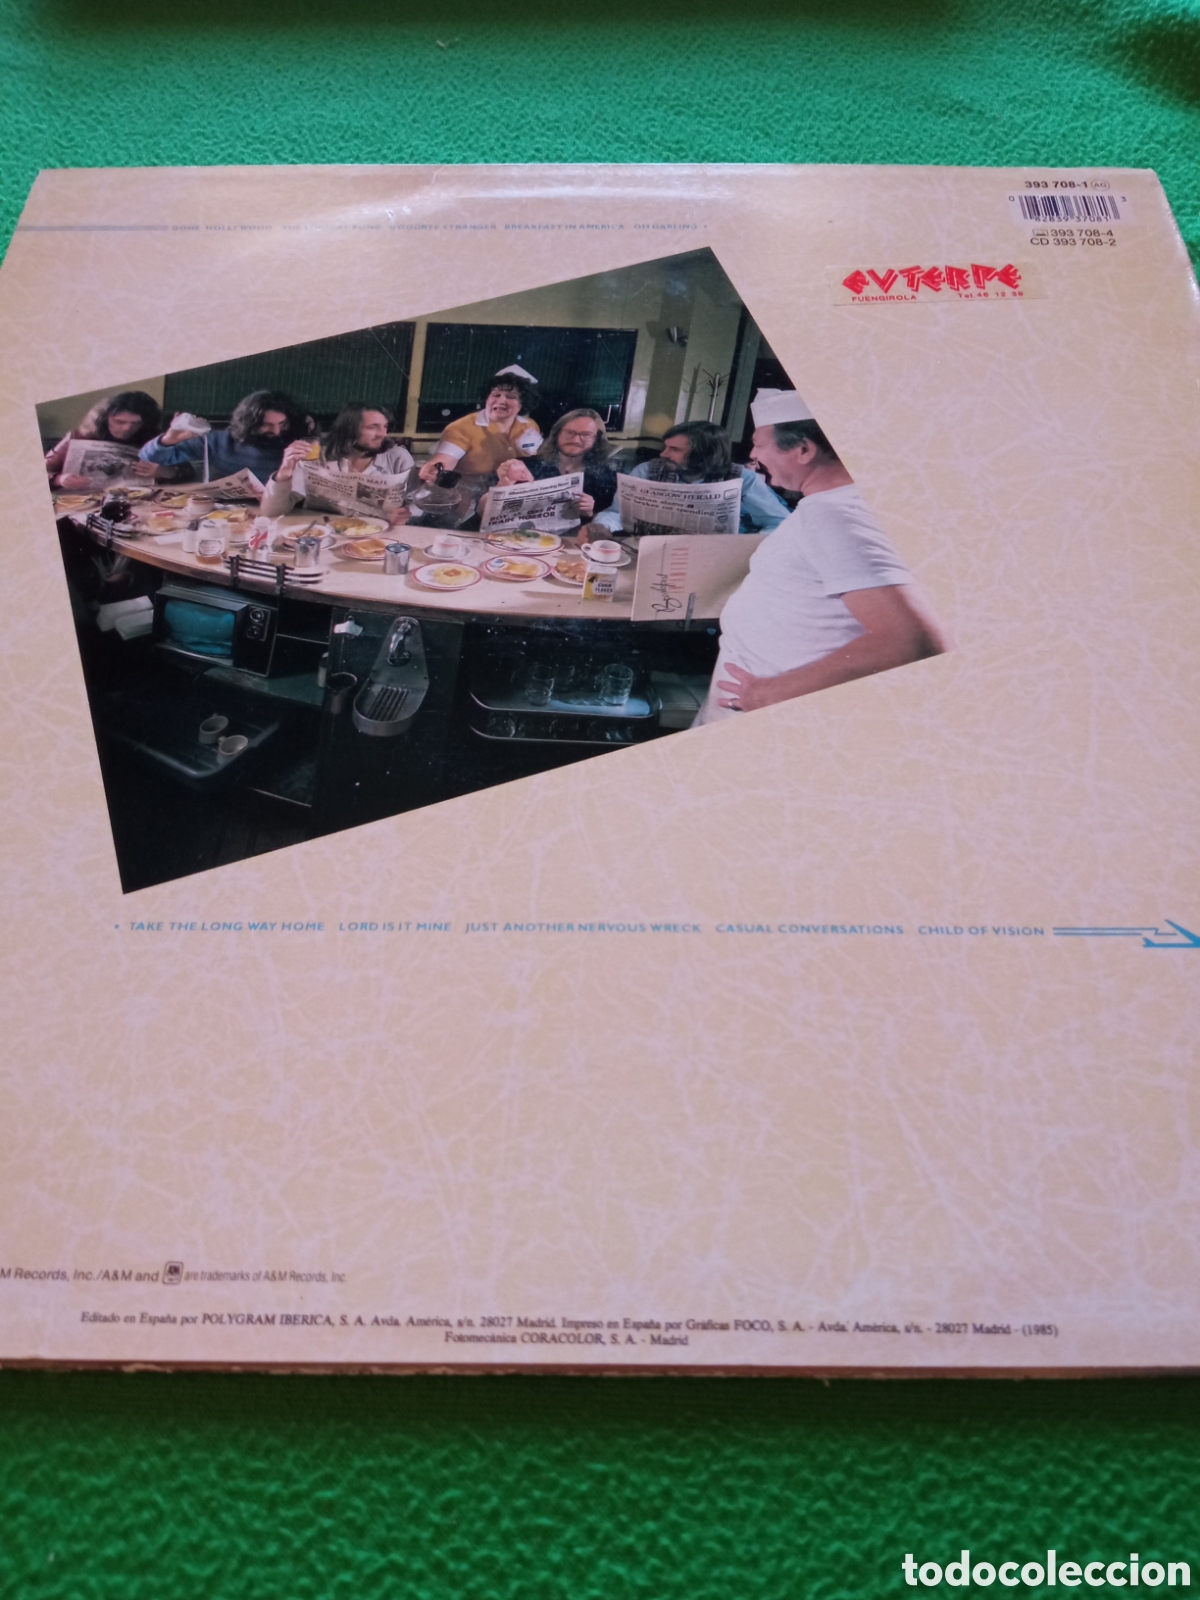 supertramp ‎– breakfast in america. a&m records - Buy LP vinyl records of  Pop-Rock International of the 70s on todocoleccion